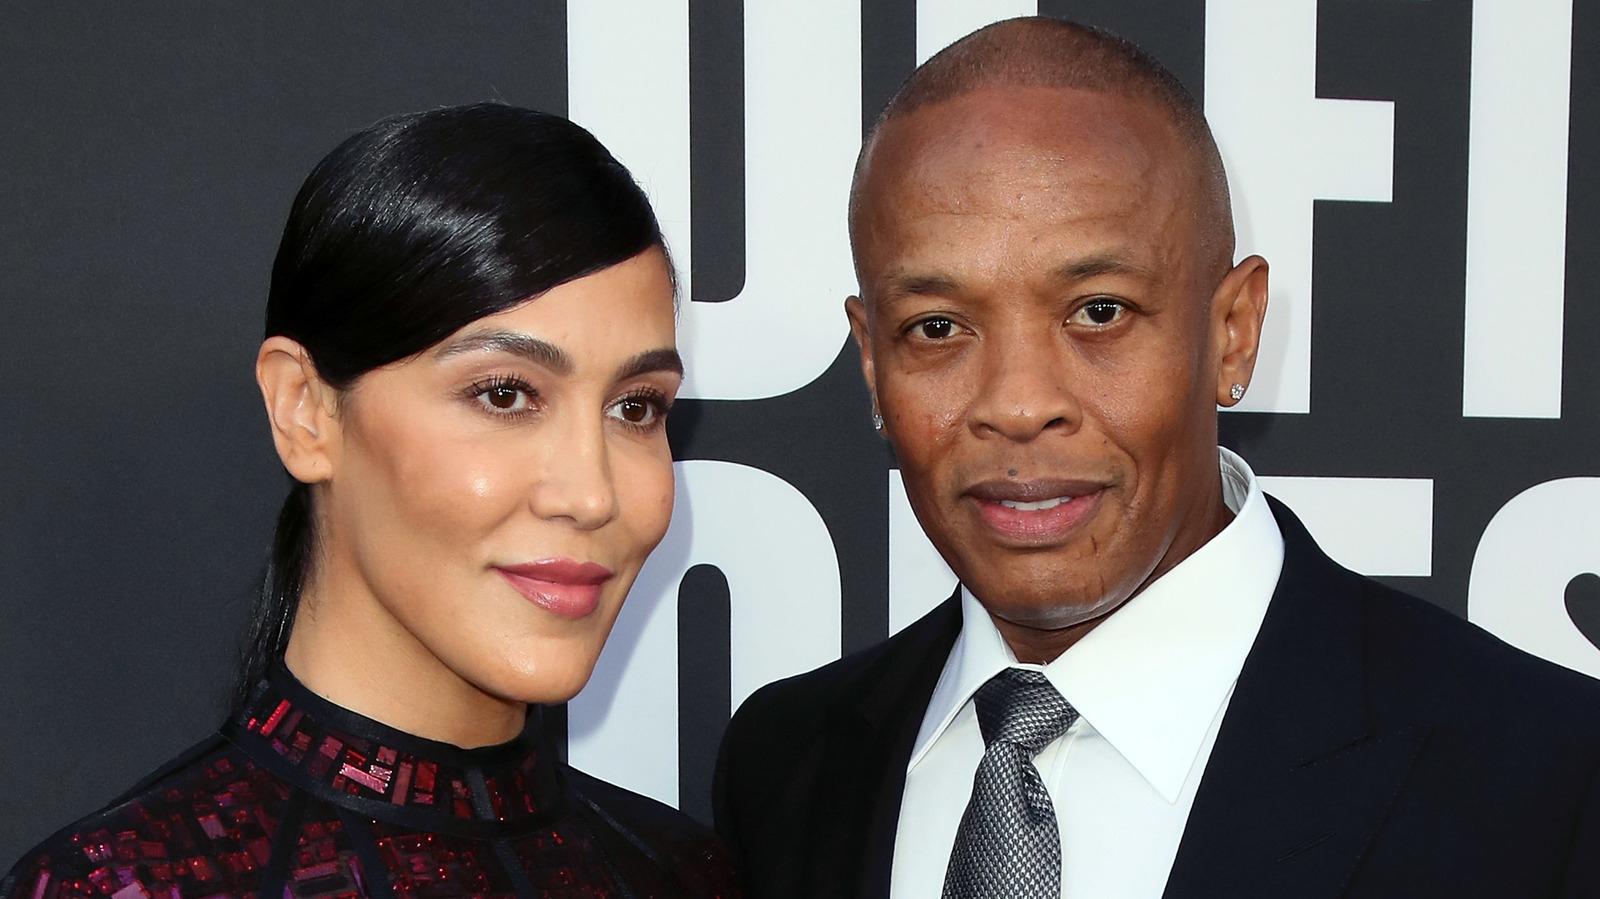 Inside Dr. Dre's New Settlement With His Estranged Wife